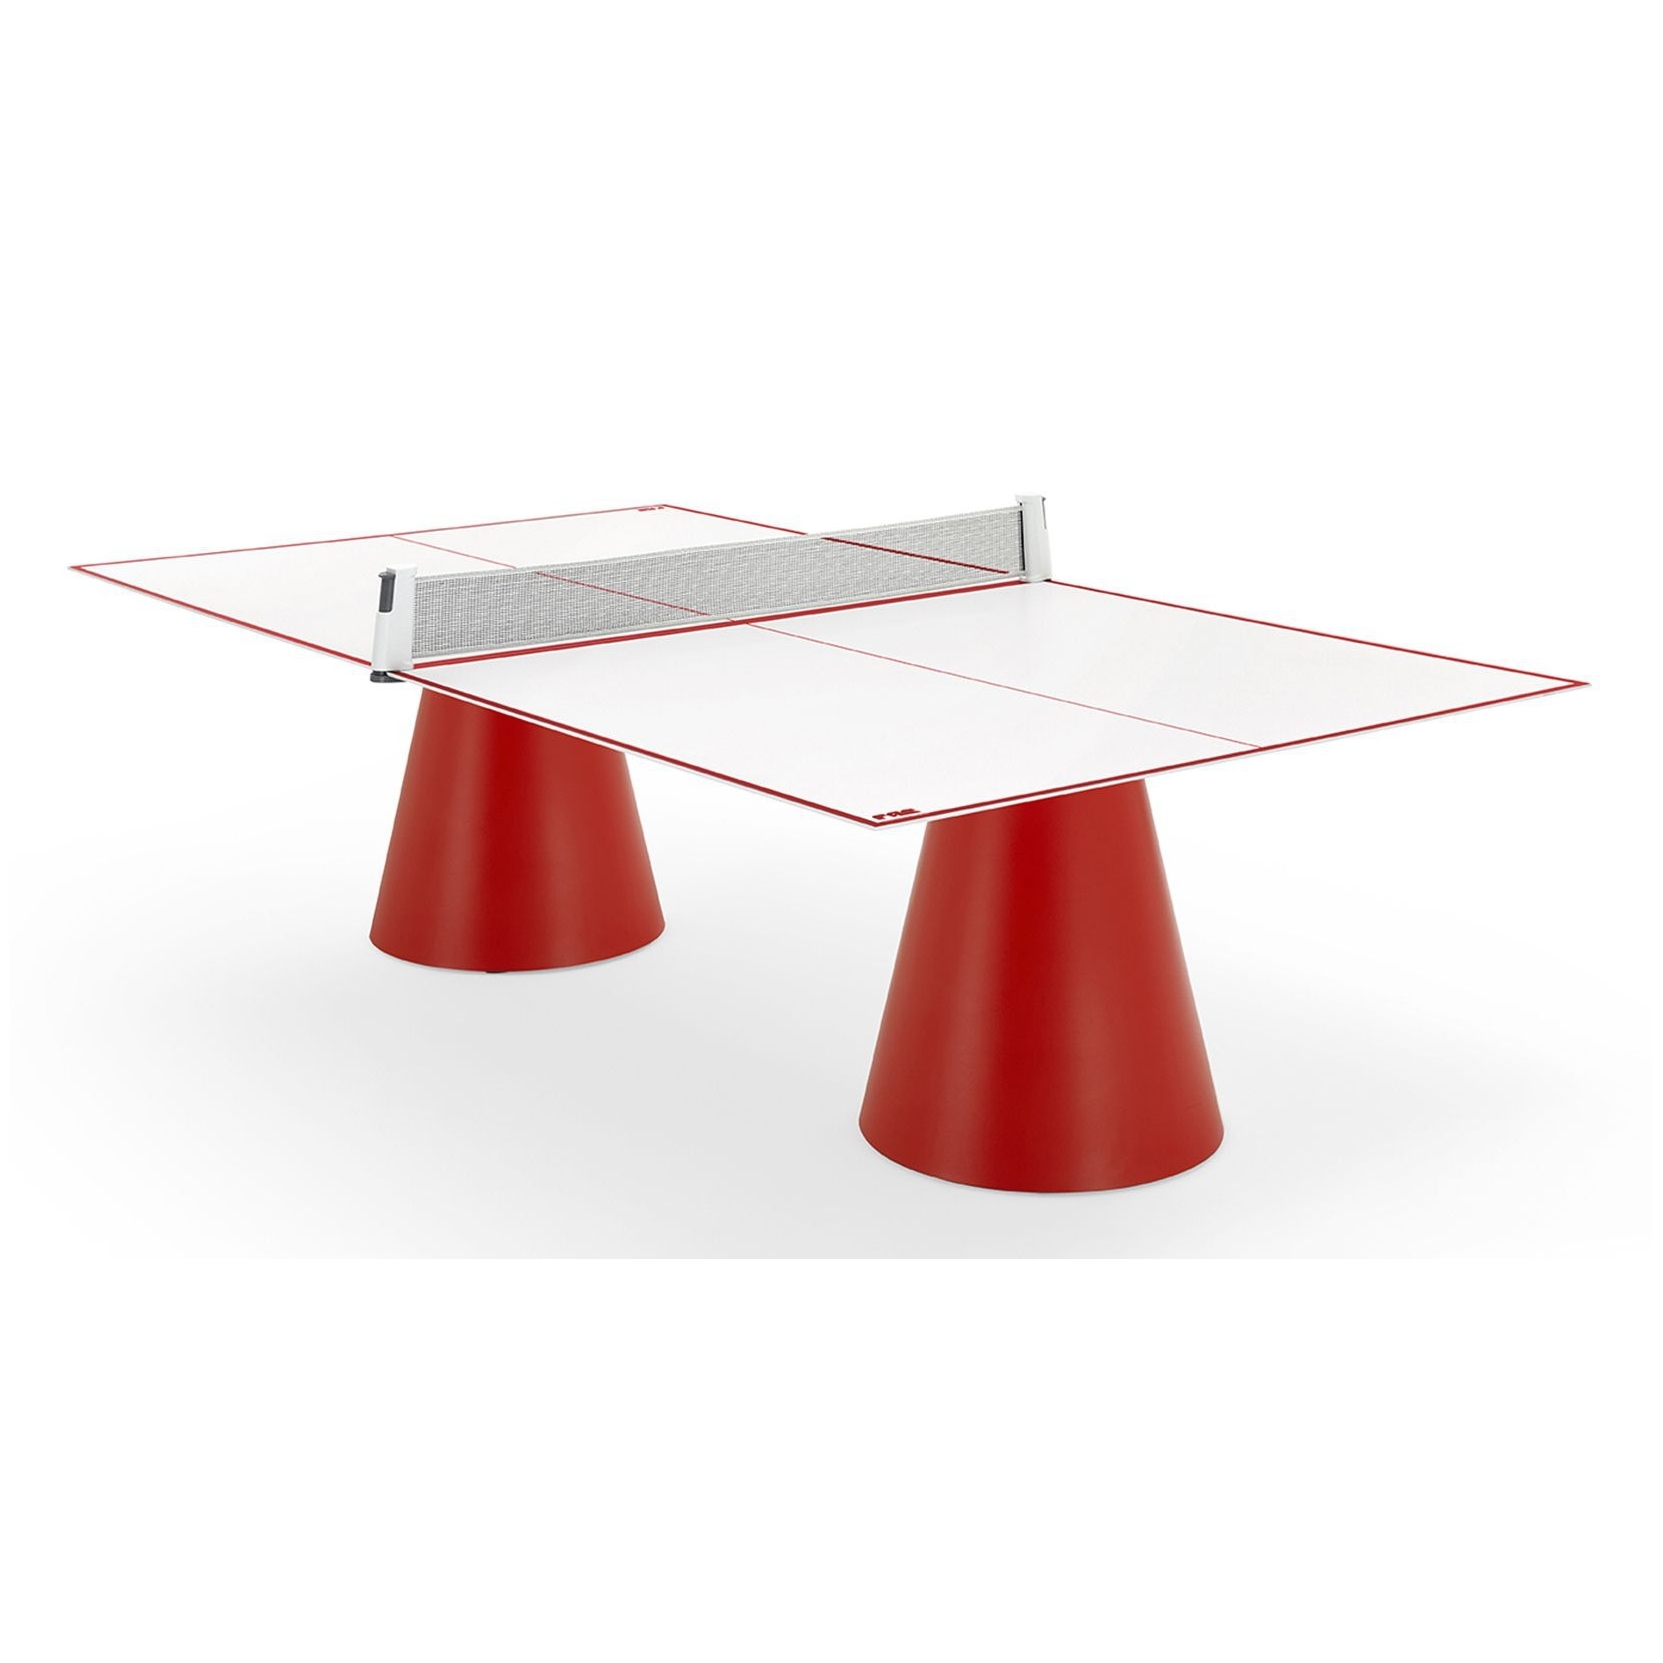 GRASSHOPPER OUTDOOR Rectangular Ping pong table By FAS Pendezza